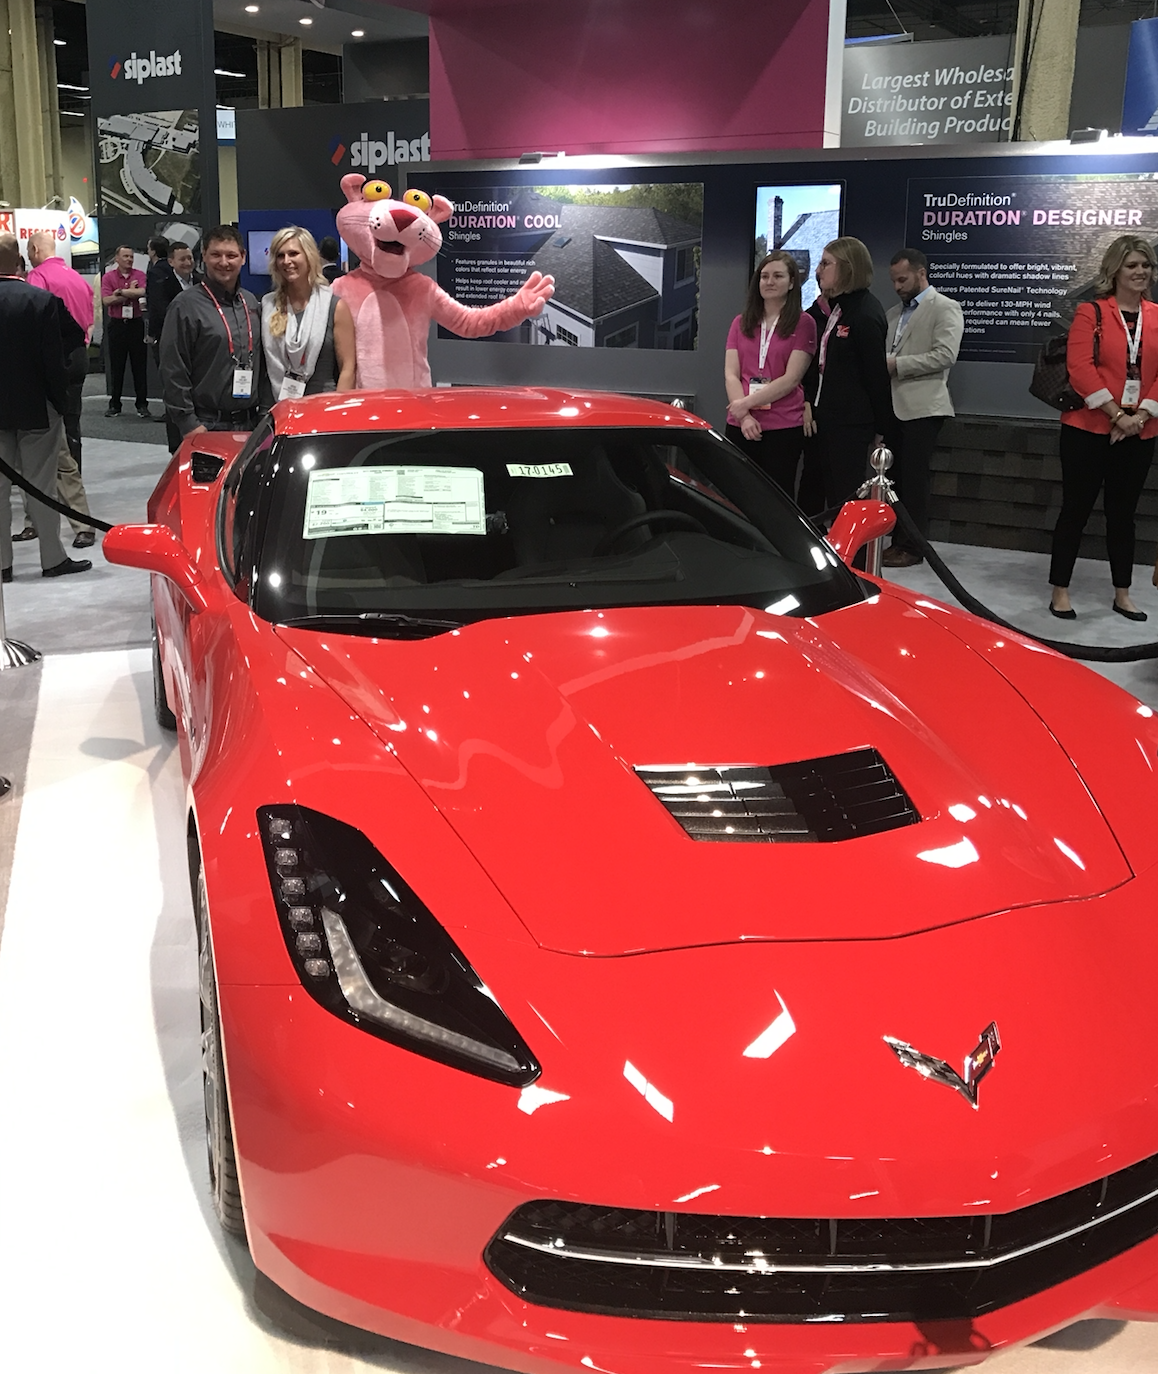 Chris Amiot (left) of Advantage Construction Inc. was awarded the Grand Prize of a 2017 Chevrolet Corvette Stingray Coupe in Owens Corning’s 2017 Accelerate Sweepstakes.